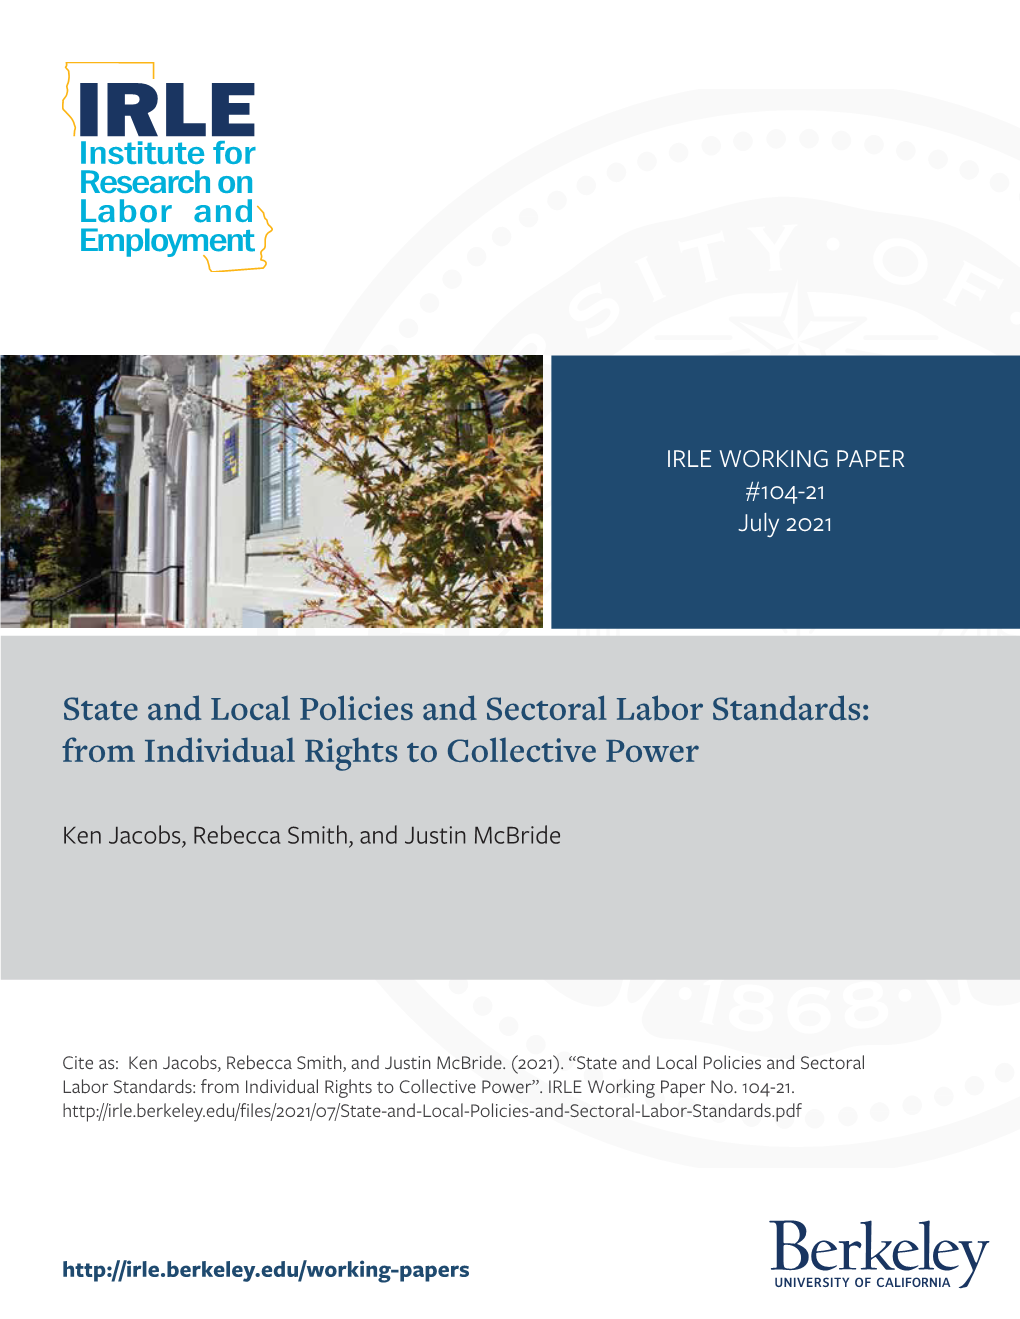 State and Local Policies and Sectoral from Individual Rights to Collective